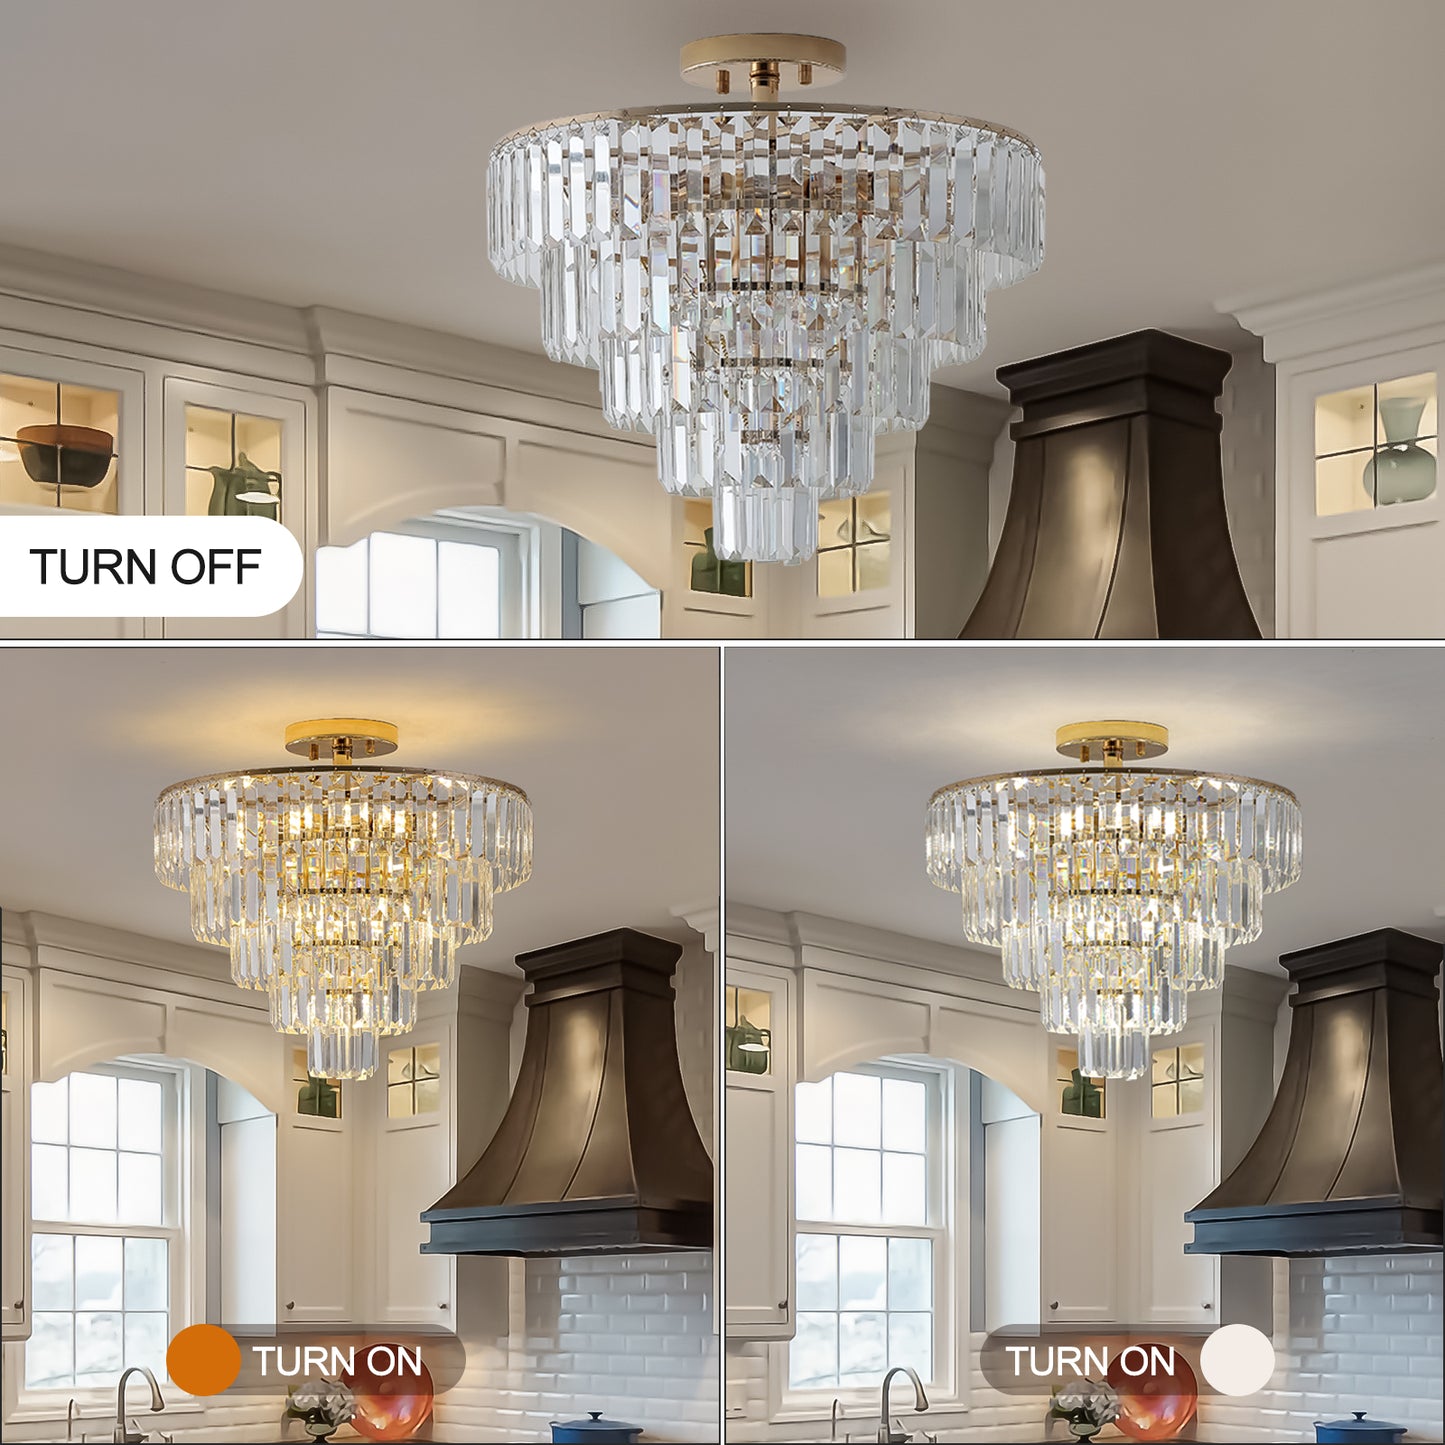 Gold Crystal Chandeliers,5-Tier Round Semi Flush Mount Chandelier Light Fixture,Large Contemporary Luxury Ceiling Lighting